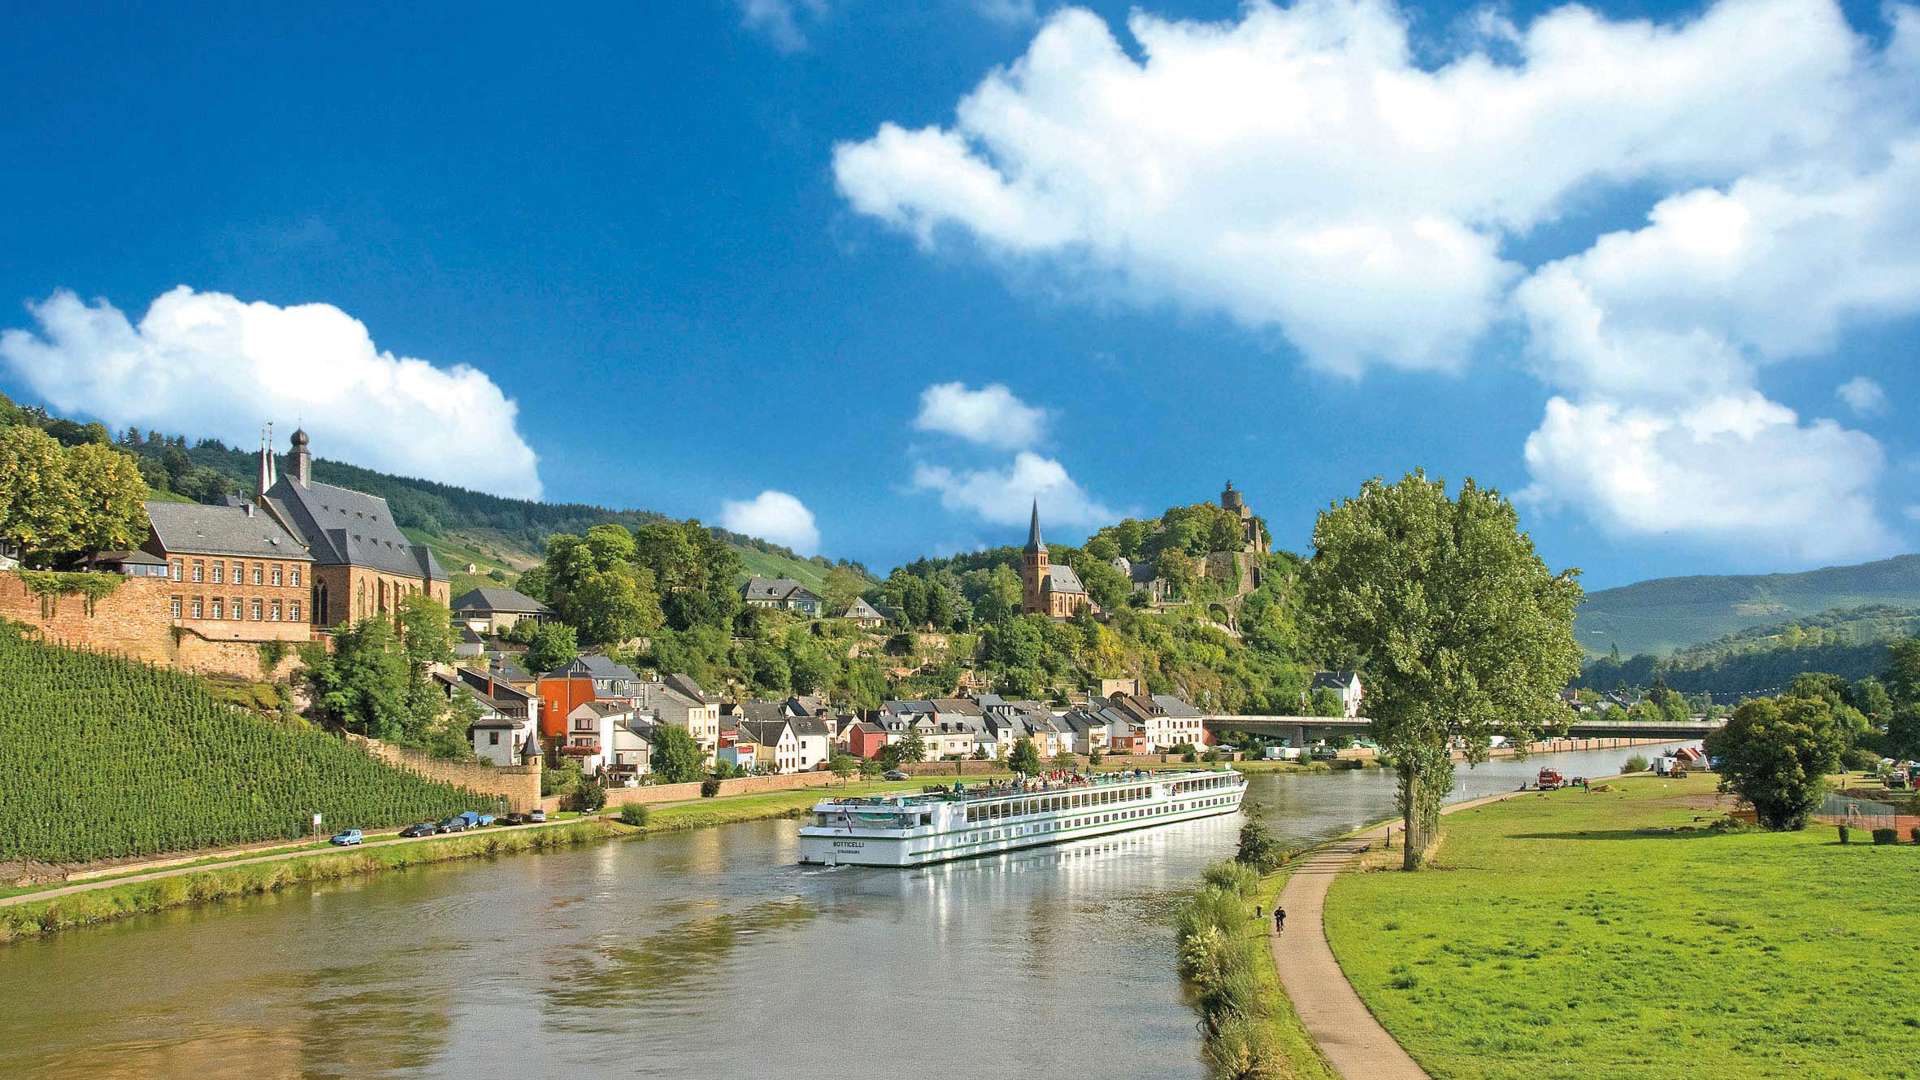 Boat passing Moselle, France